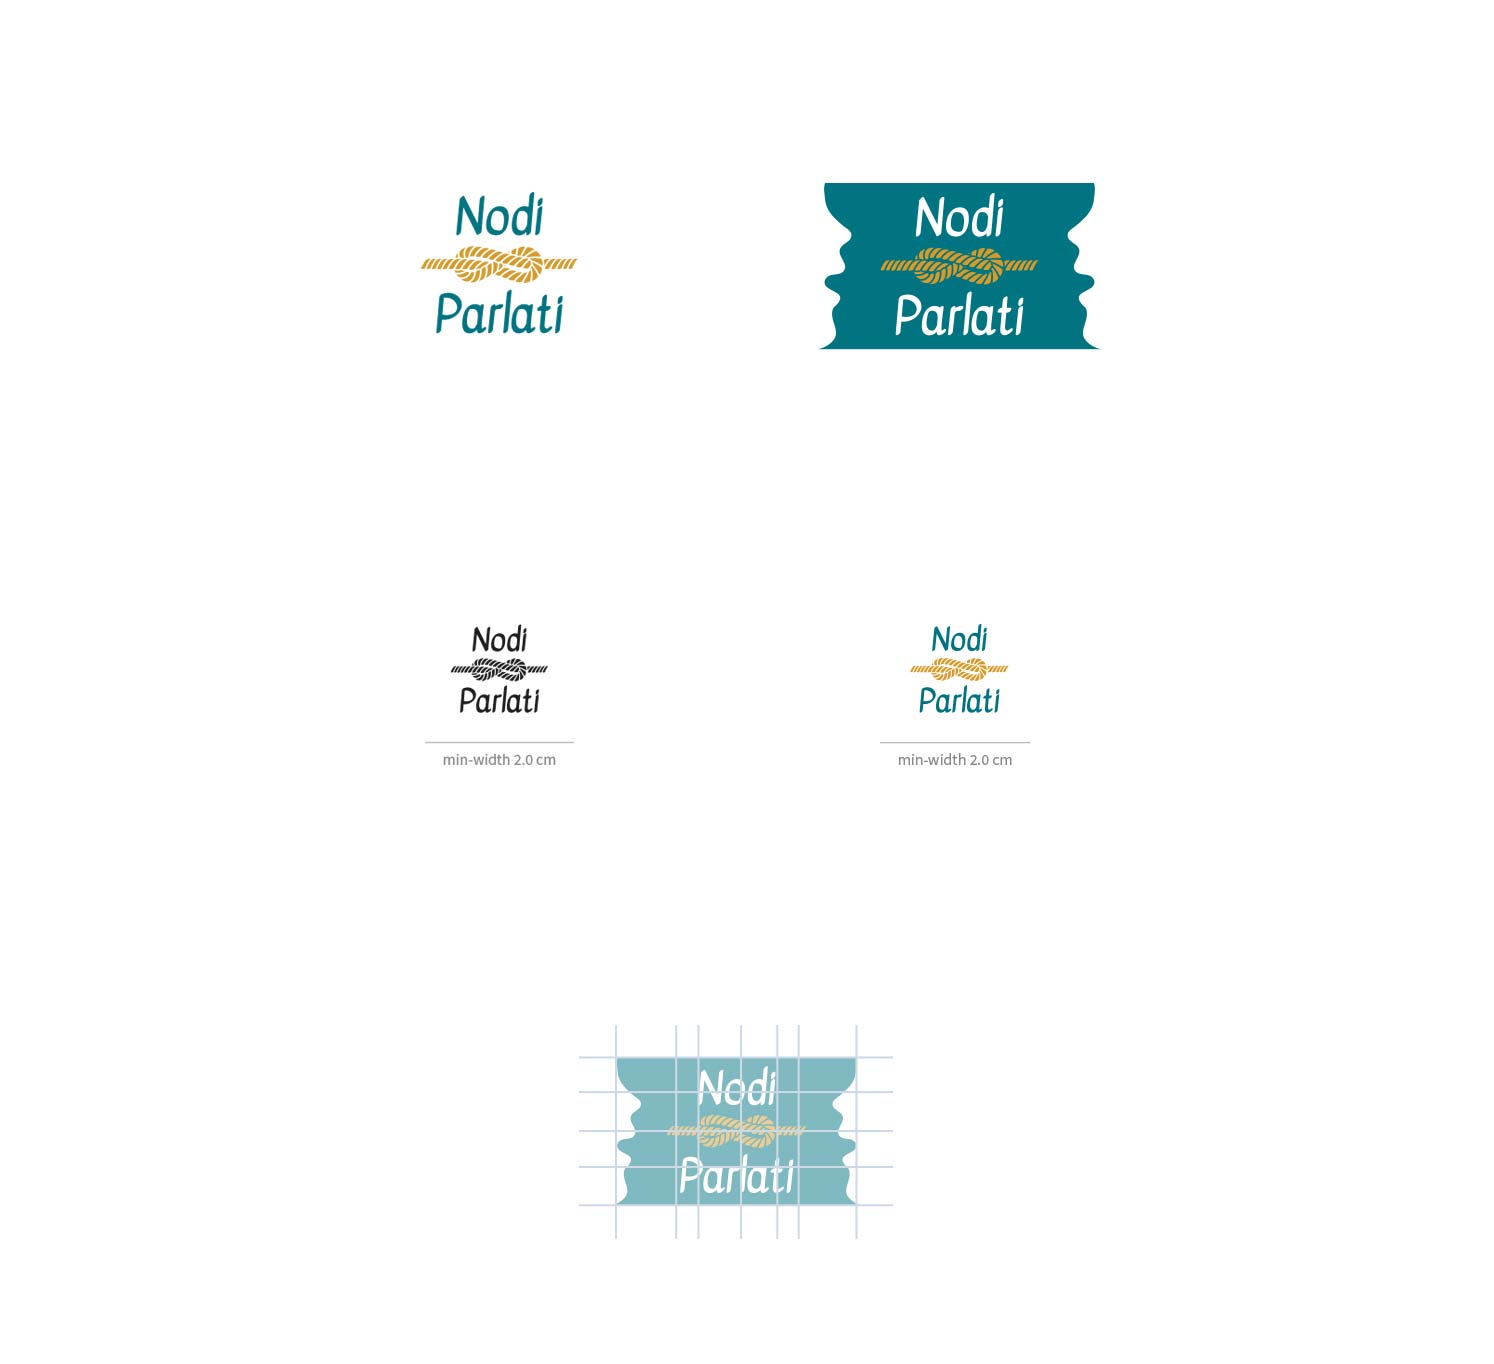 Brand identity design-logo formats and versions